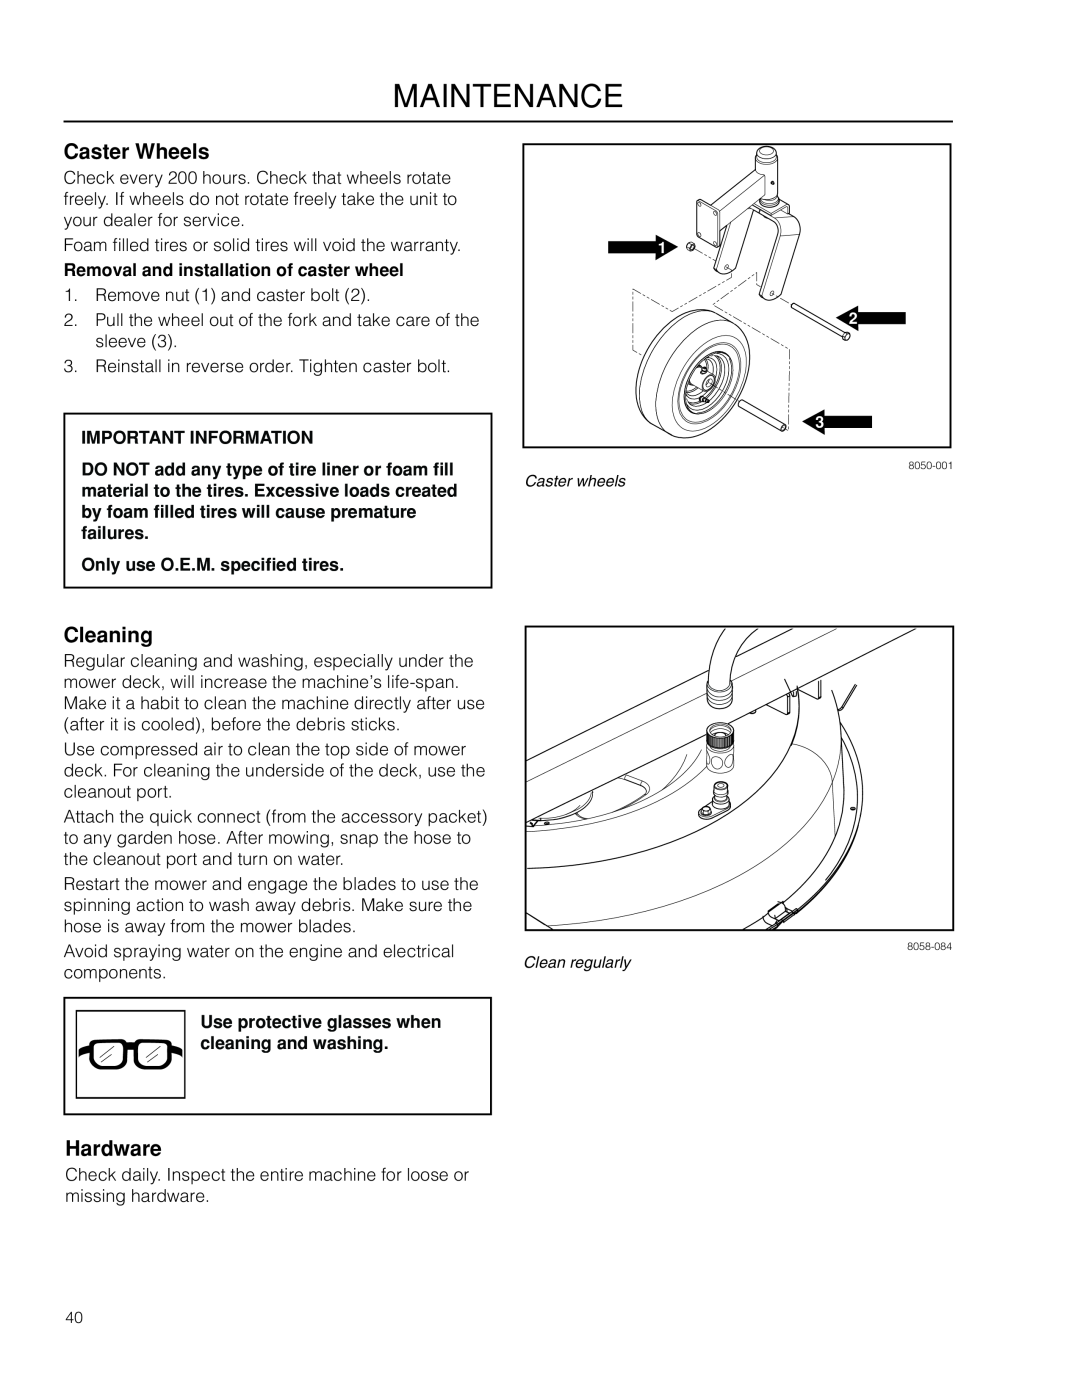 Dixon 966505101, SZ4216 CA manual Caster Wheels, Cleaning, Hardware, Removal and installation of caster wheel, Maintenance 